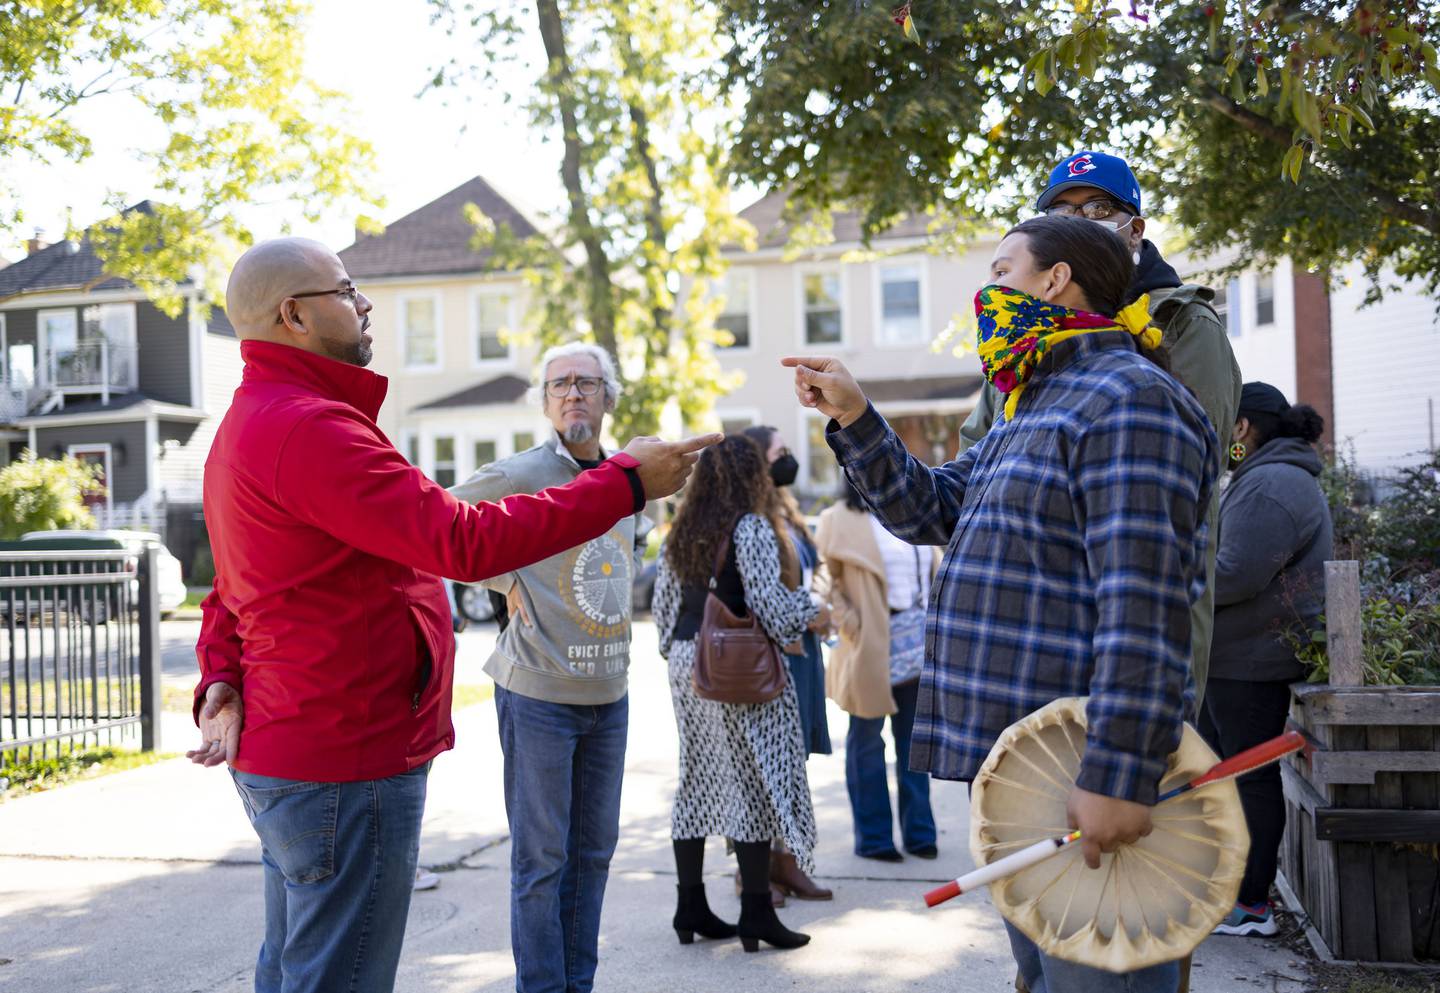 Ald. Andre Vasquez, left, has a discussion with members of the Chi-Nations Youth Council after their protest disrupted an Indigenous Peoples Day celebration on Oct. 10, 2022.